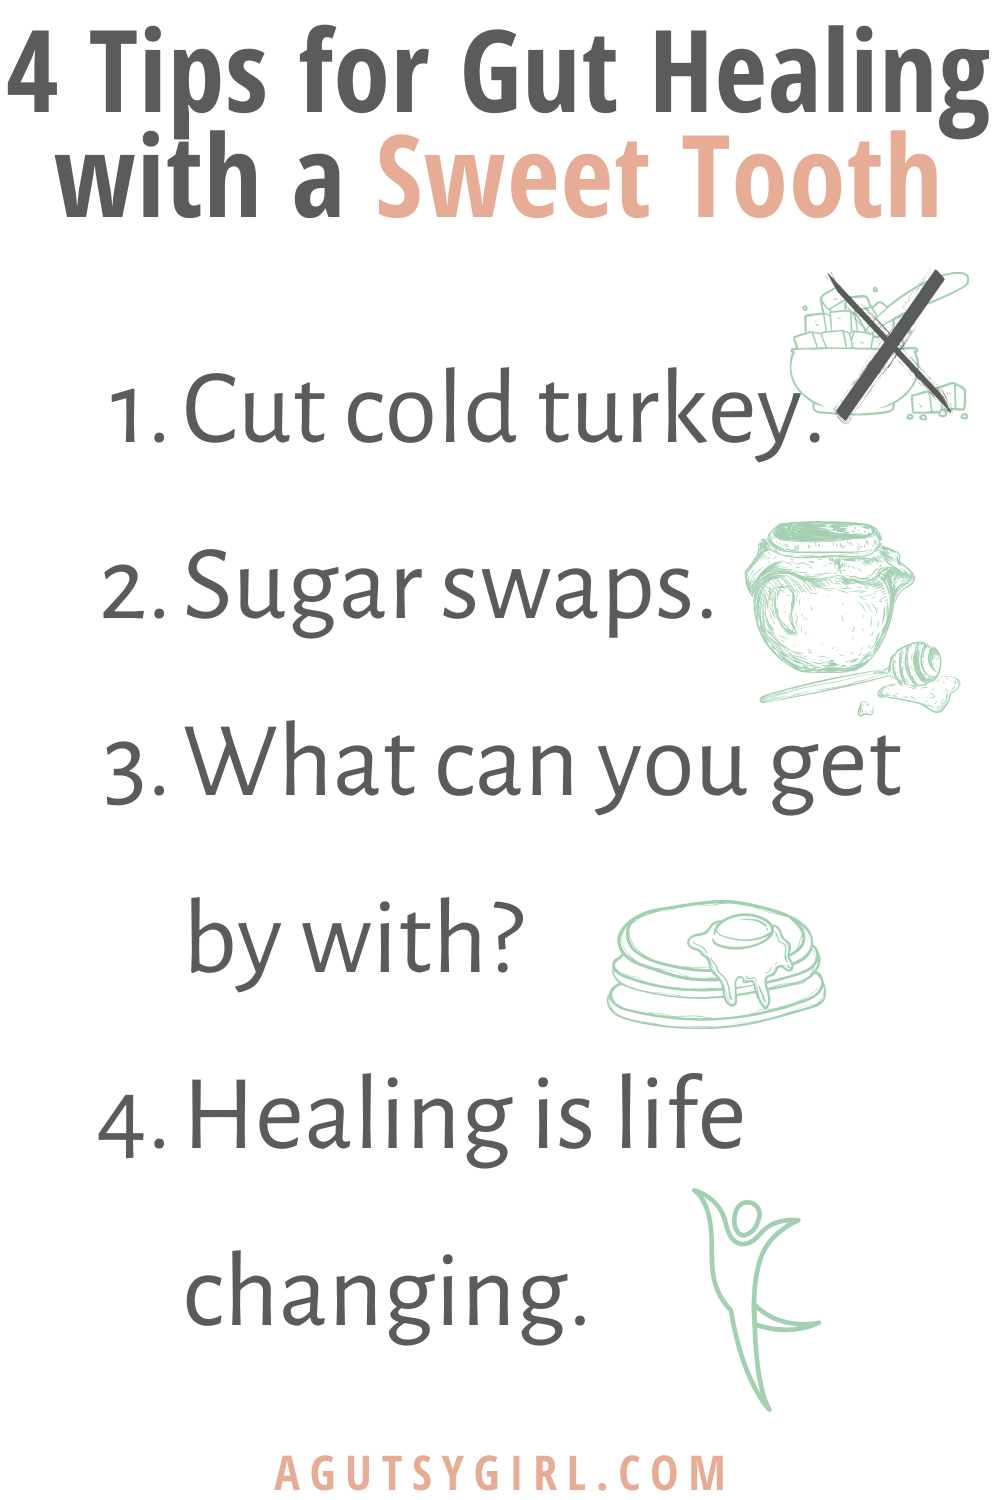 4 Tips for Gut Healing with a Sweet Tooth agutsygirl.com #guthealth #nosugar #sugarfree #healthyliving